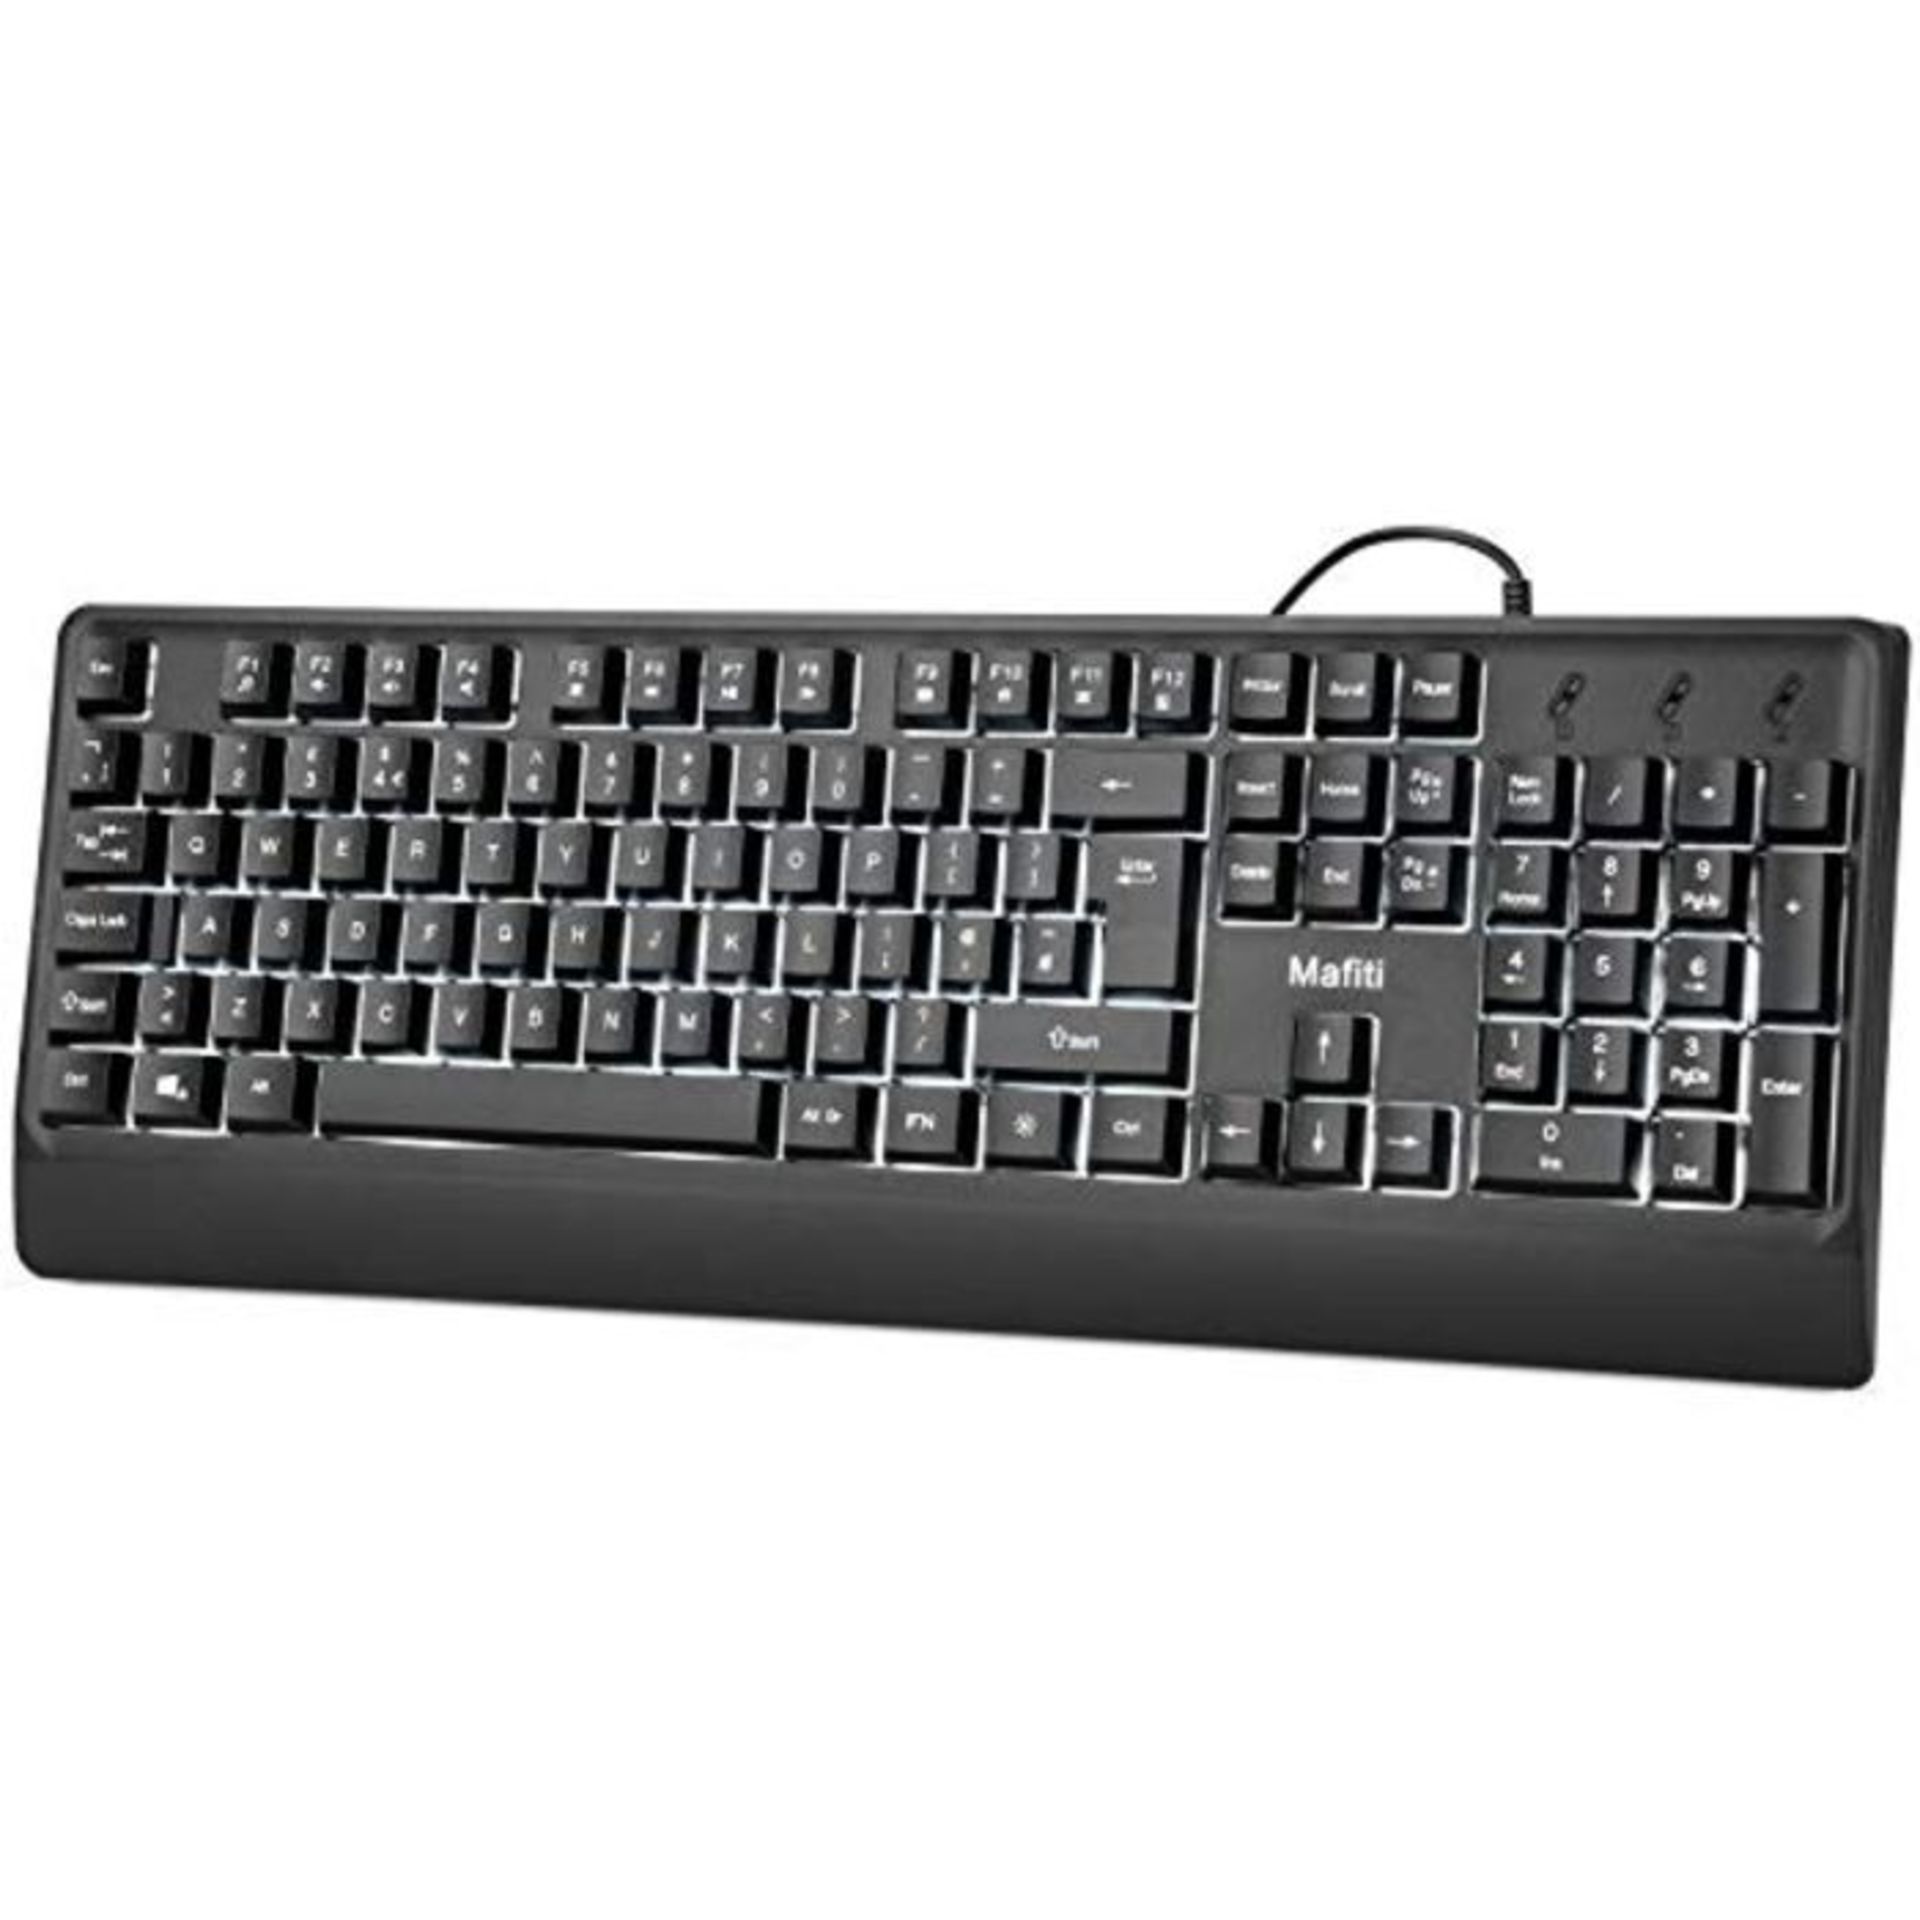 [INCOMPLETE] [CRACKED] mafiti Computer Office Keyboard Wired USB 104 Keys Full Size Wh